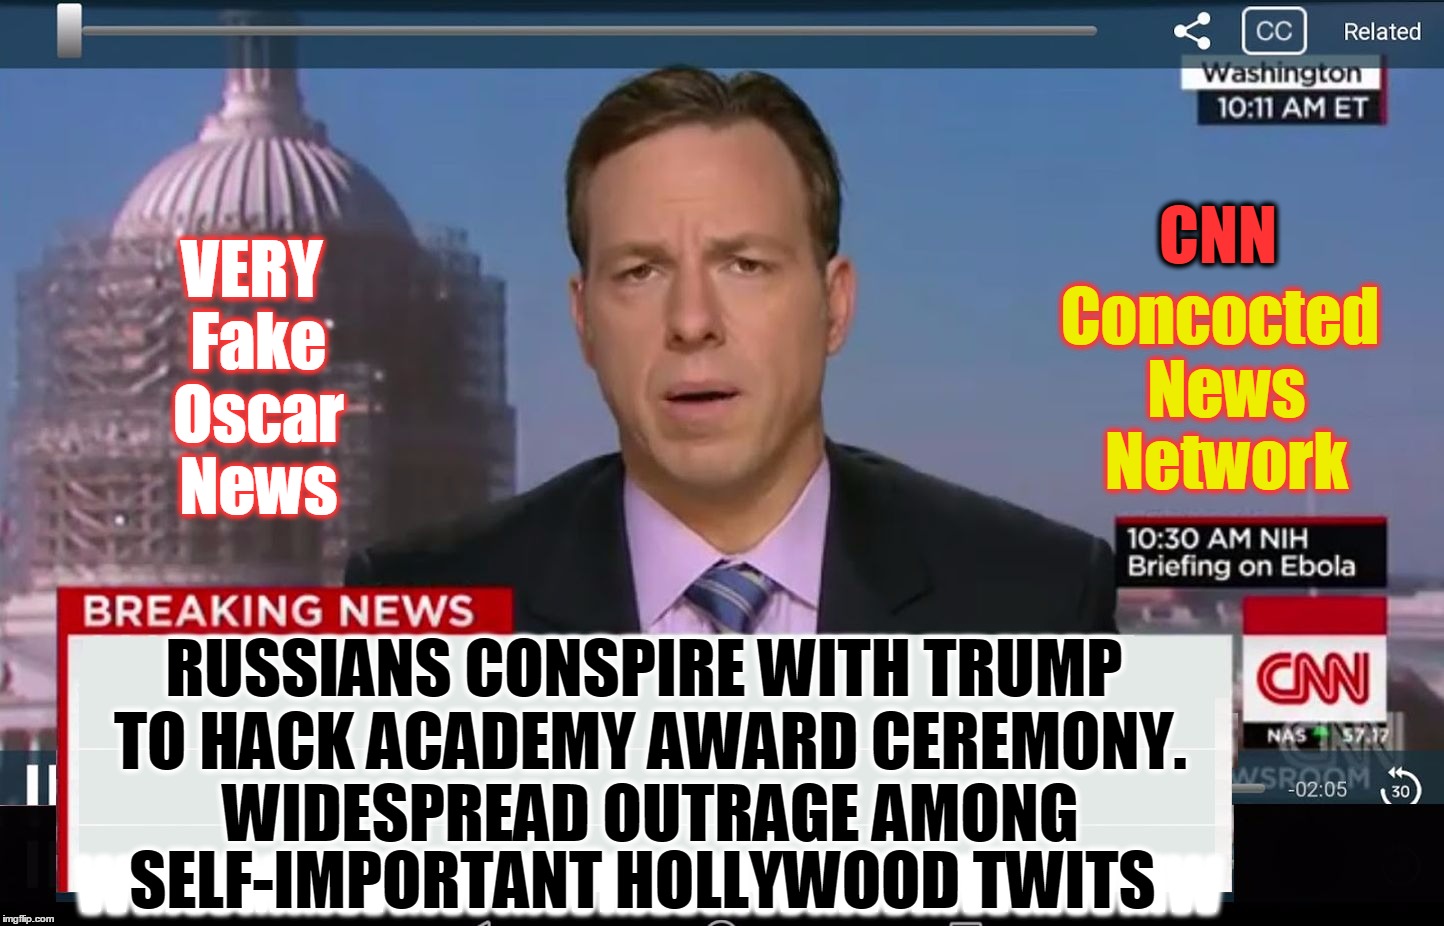 CNN Crazy News Network | CNN; VERY Fake Oscar News; Concocted News Network; RUSSIANS CONSPIRE WITH TRUMP TO HACK ACADEMY AWARD CEREMONY. WIDESPREAD OUTRAGE AMONG; SELF-IMPORTANT HOLLYWOOD TWITS; WMWMMWMWMWMWMWMWMWMWMW | image tagged in cnn crazy news network | made w/ Imgflip meme maker